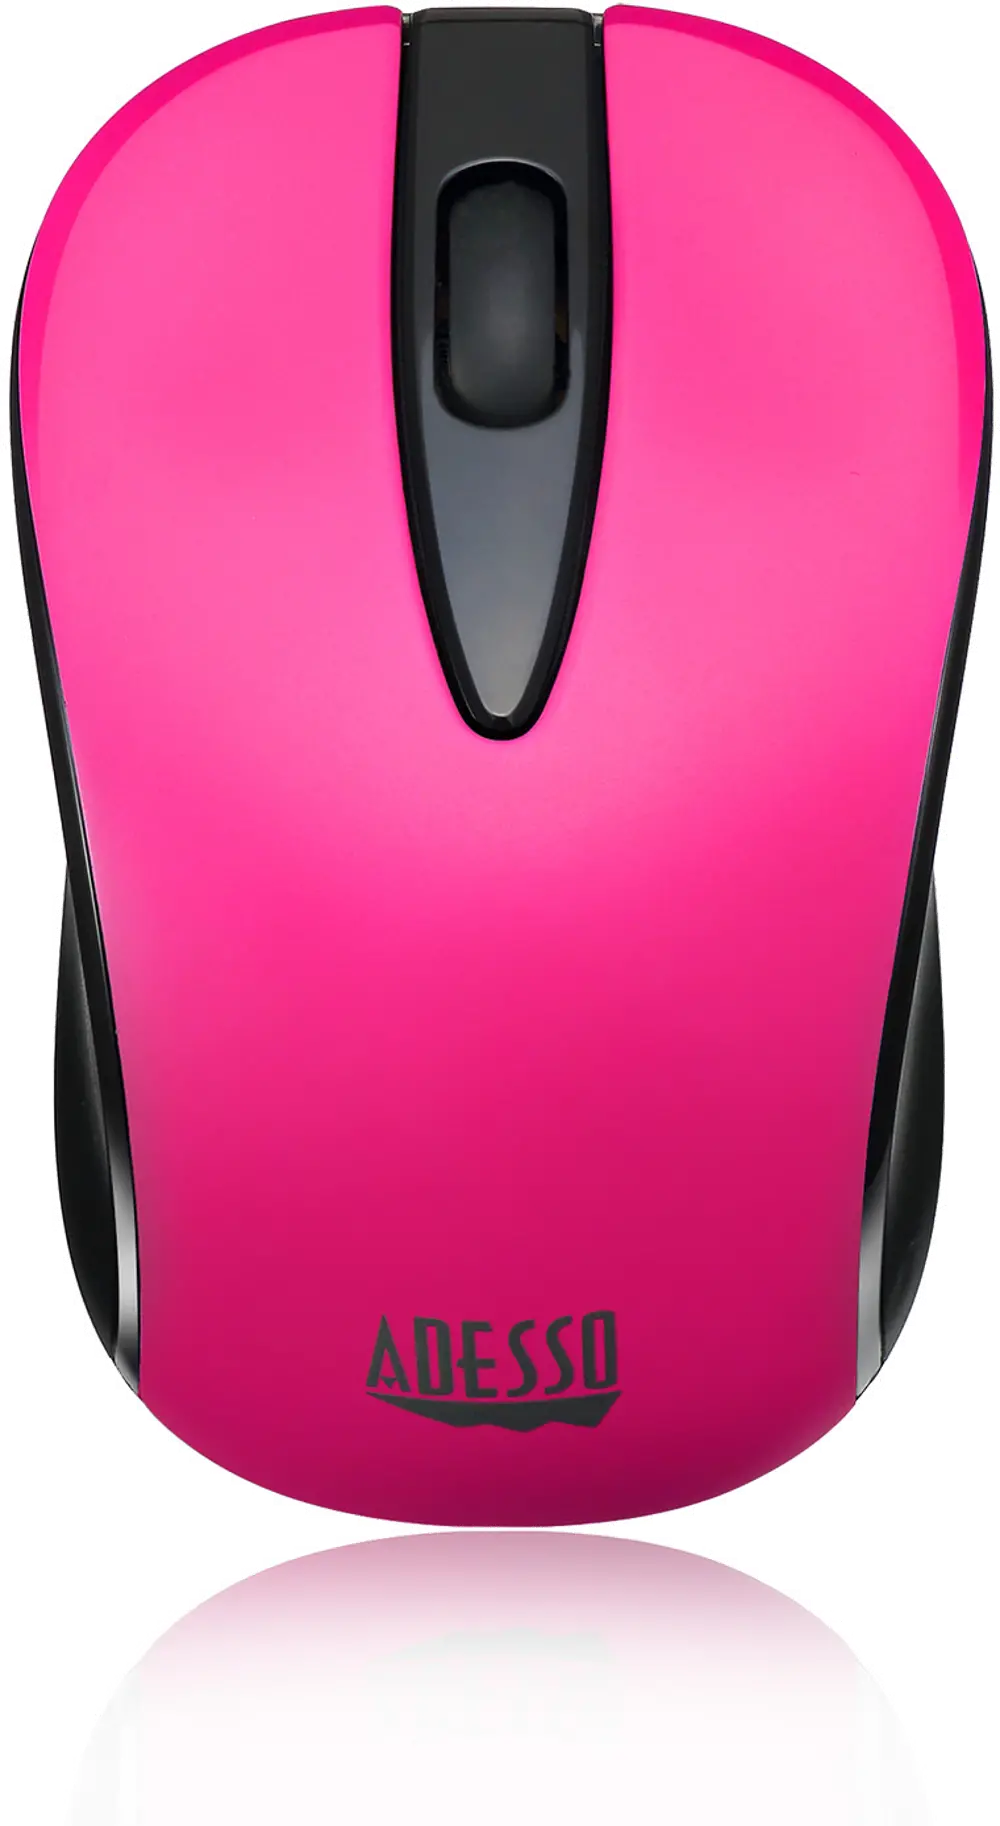 iMOUSE-S70 PINK Adesso Optical Wireless Neon Pink iMouse - S70-1